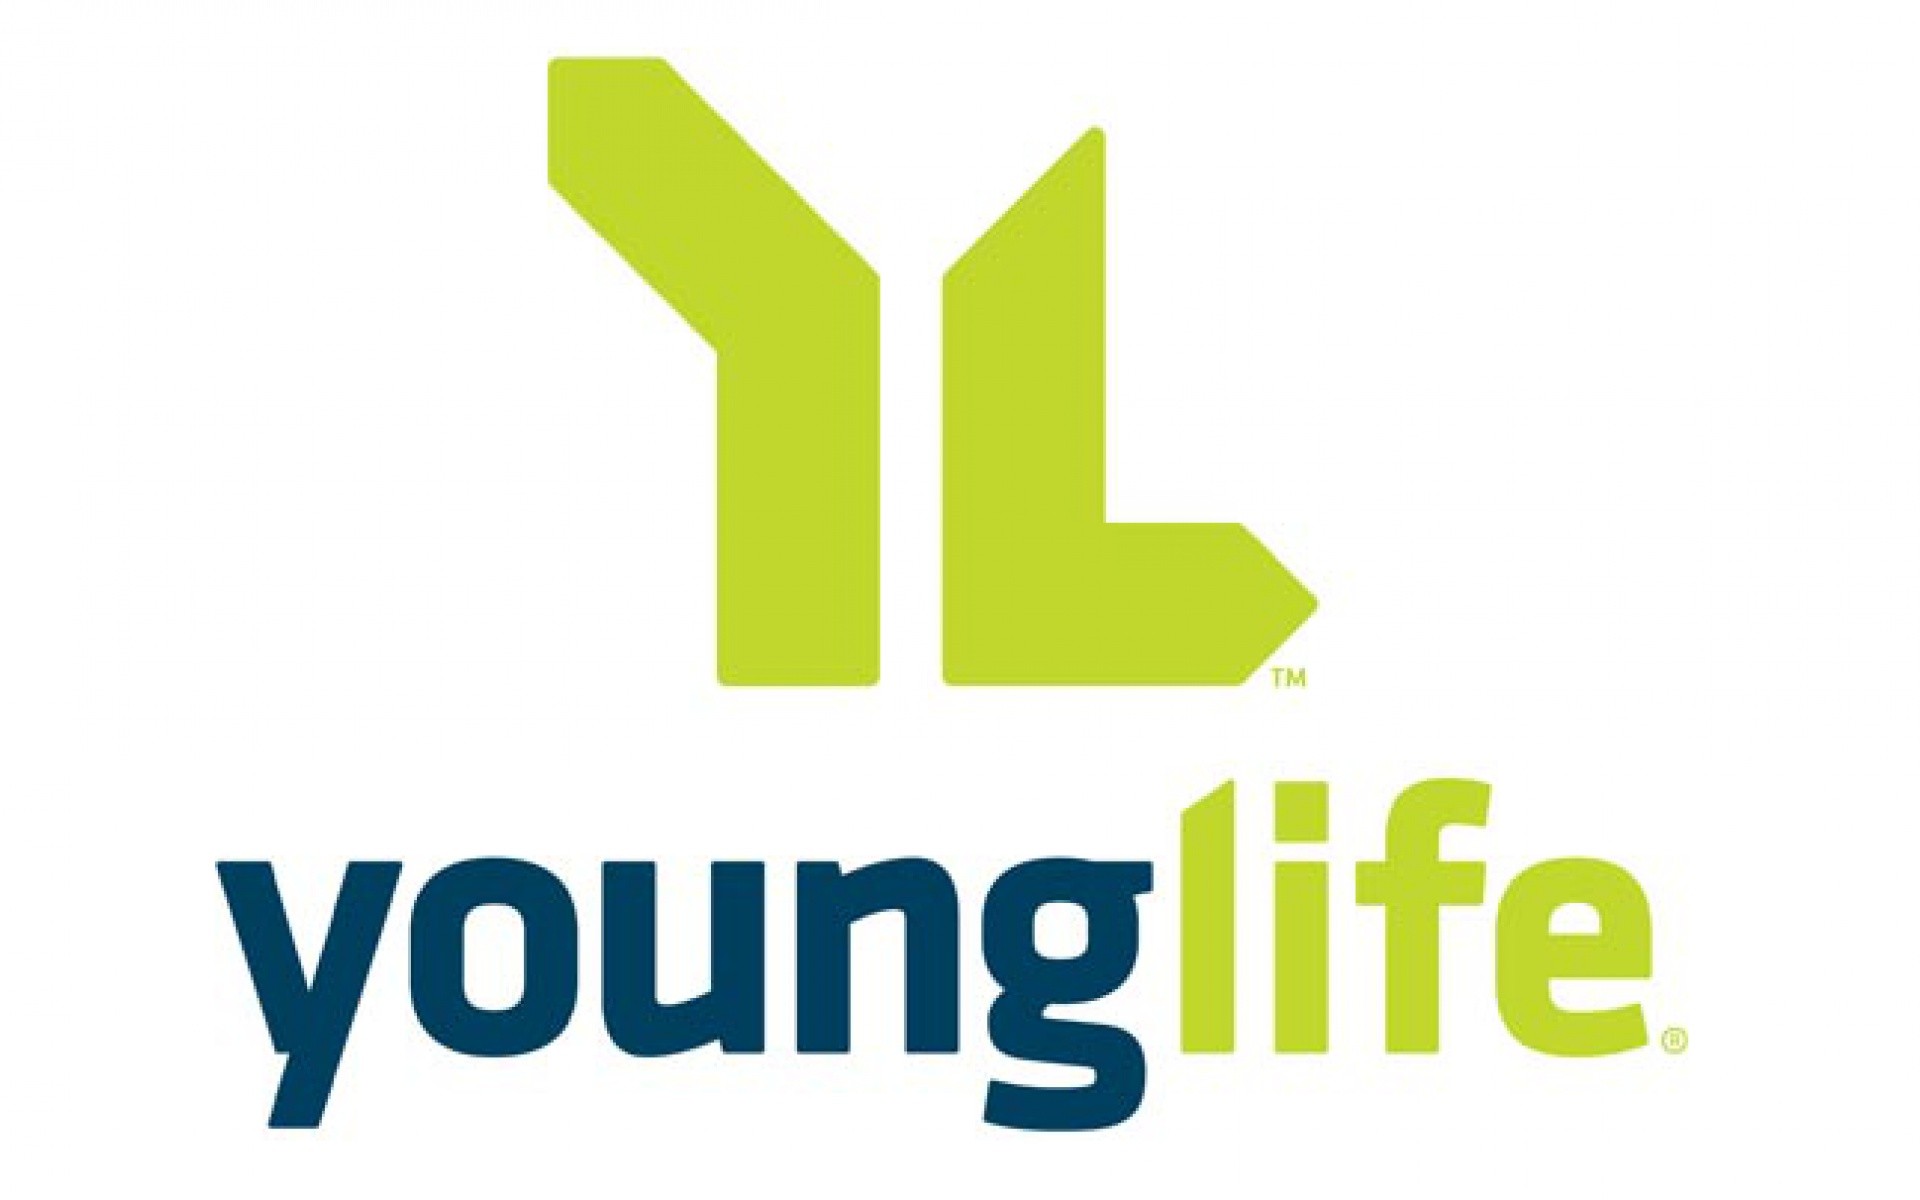 YoungLife